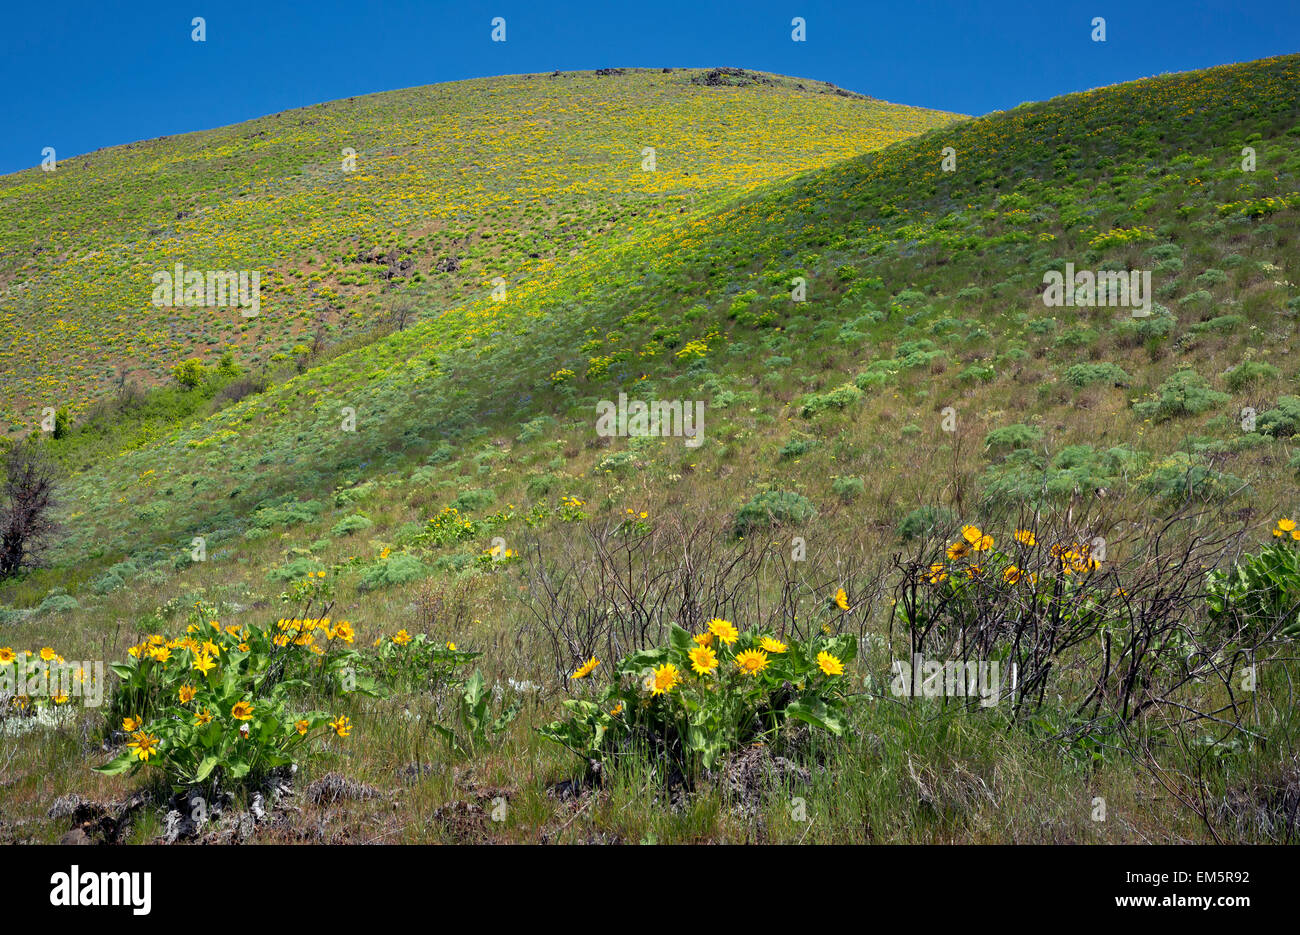 WA10323-00...WASHINGTON - Hillside covered with balsamroot and desert parsley in Swale Canyon above the Klickitat Trail. Stock Photo